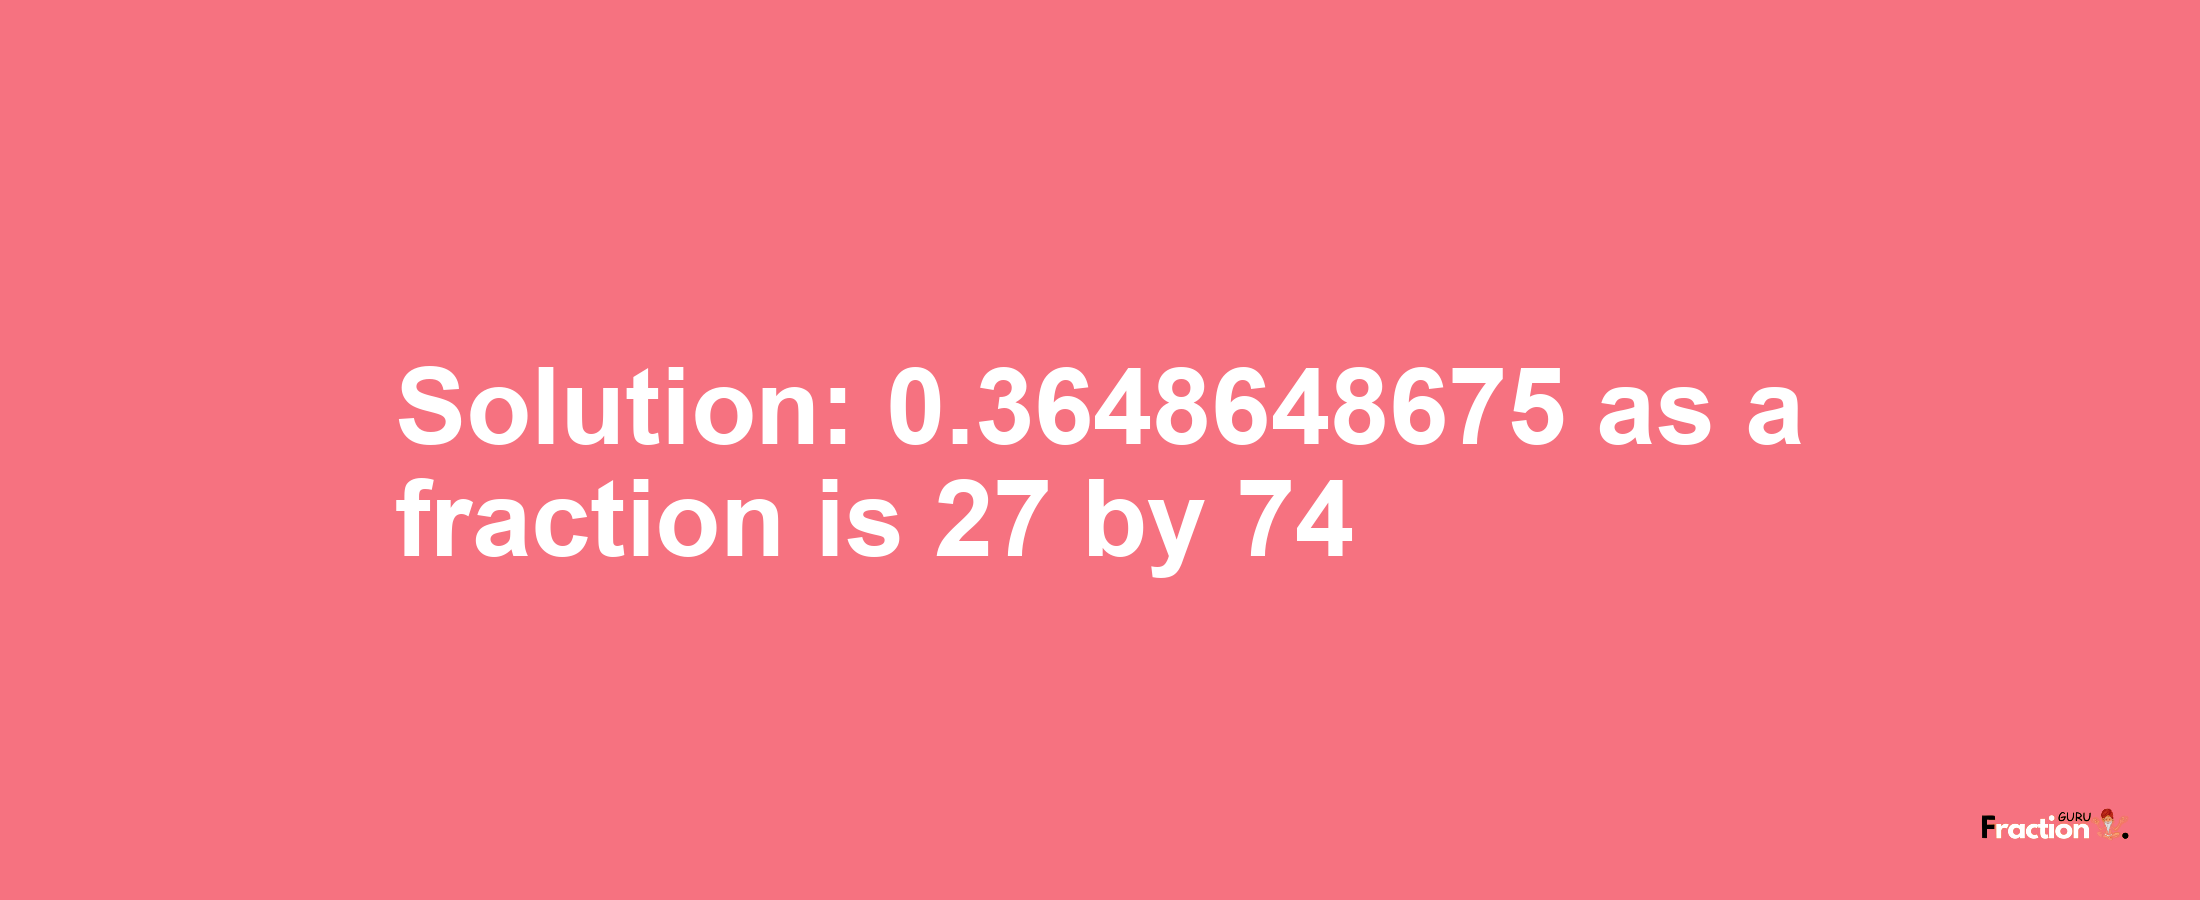 Solution:0.3648648675 as a fraction is 27/74